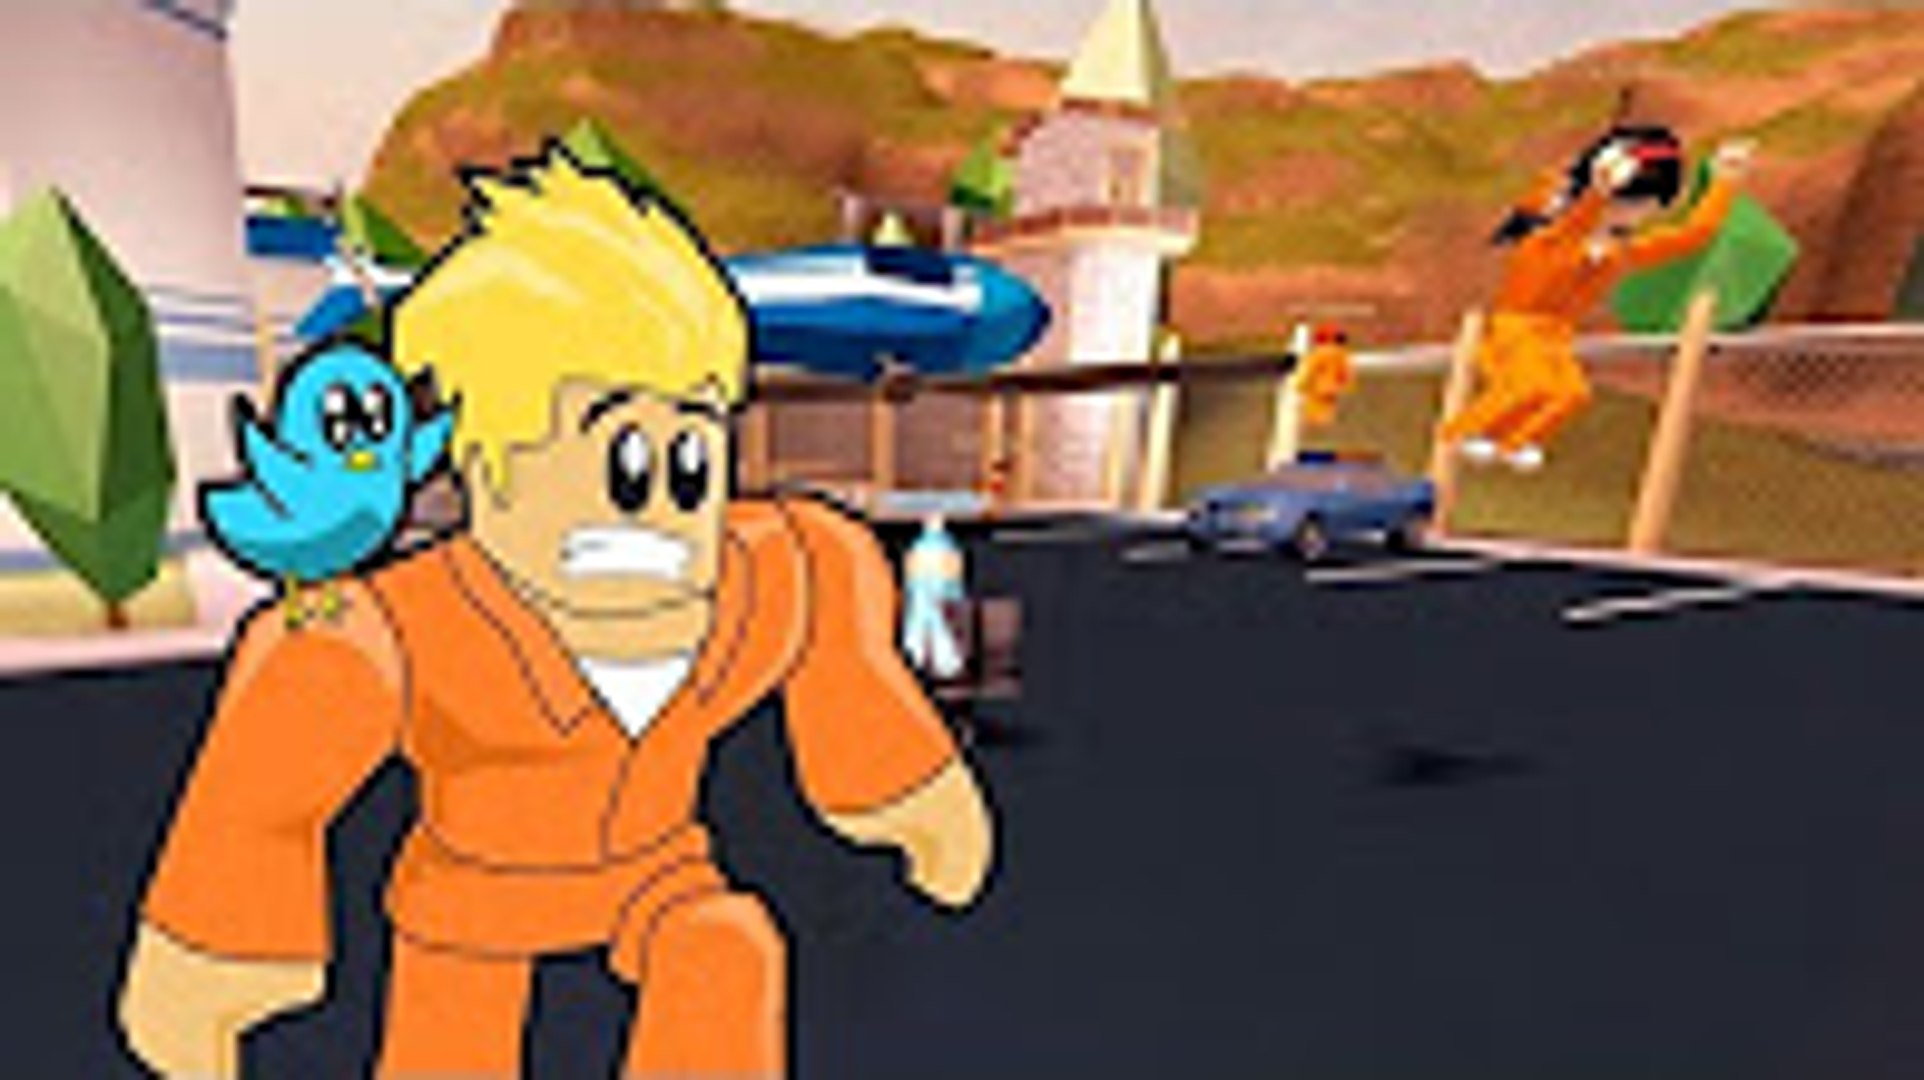 Jail Break In Roblox Prison Life Is Hard Gamer Chad Plays Video Dailymotion - naked cops in roblox jail break gamer chad plays